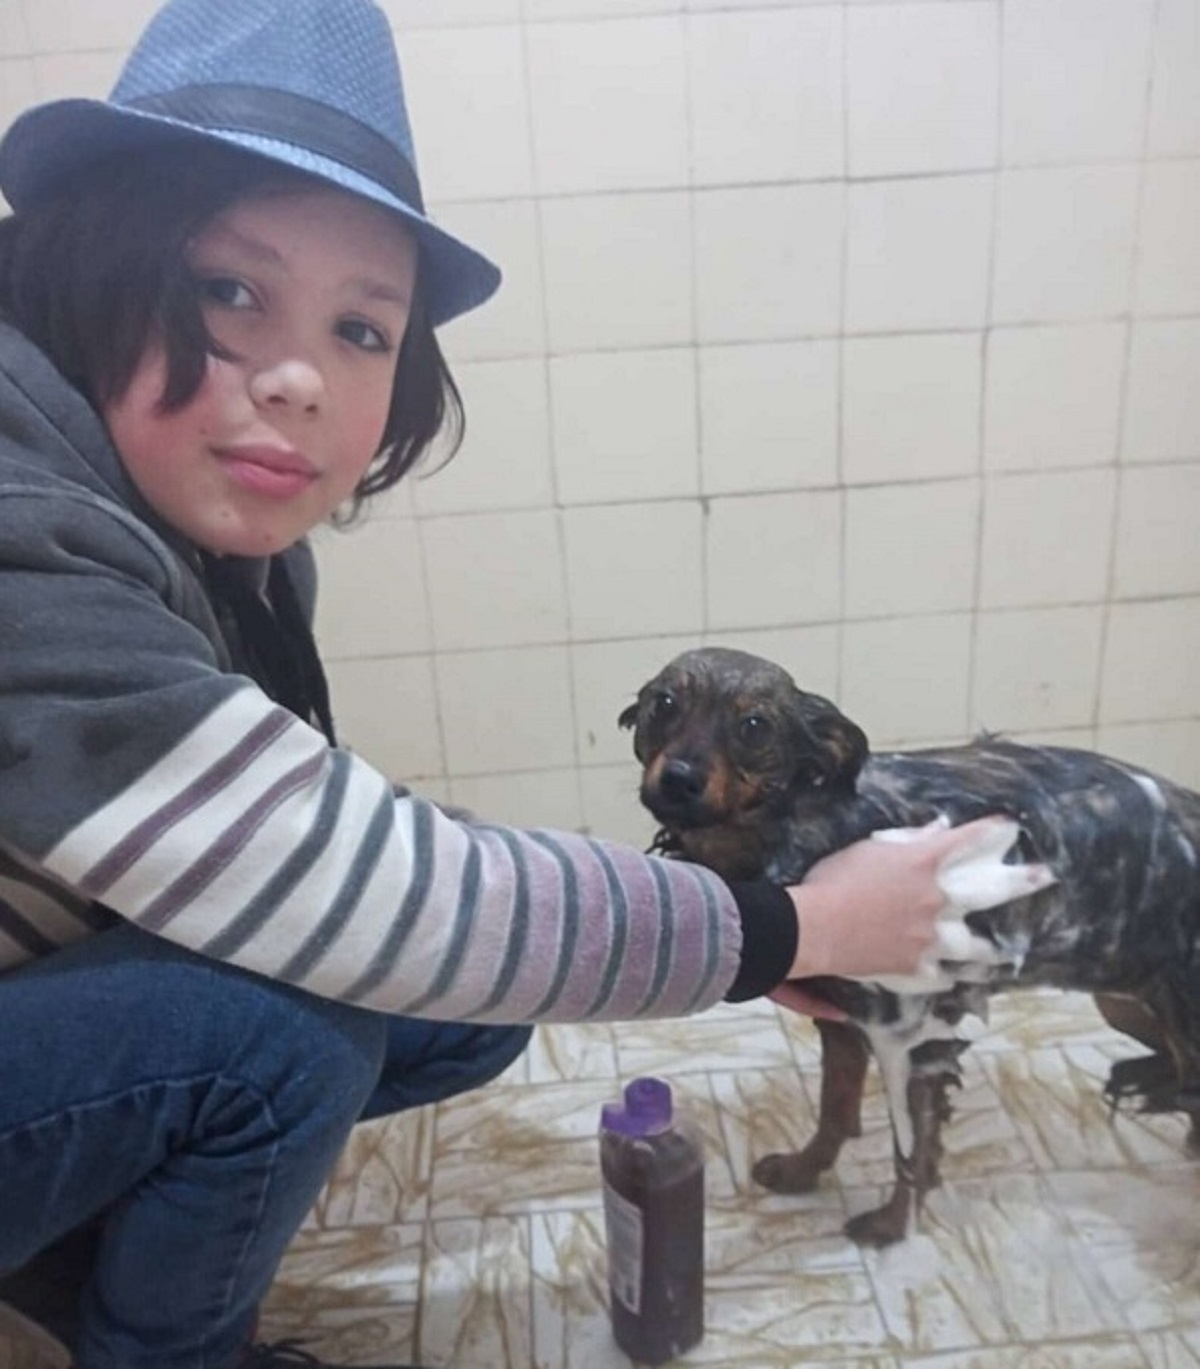 Boy Spends His Free Time Giving Stray Dogs Baths To Help Them Get Adopted